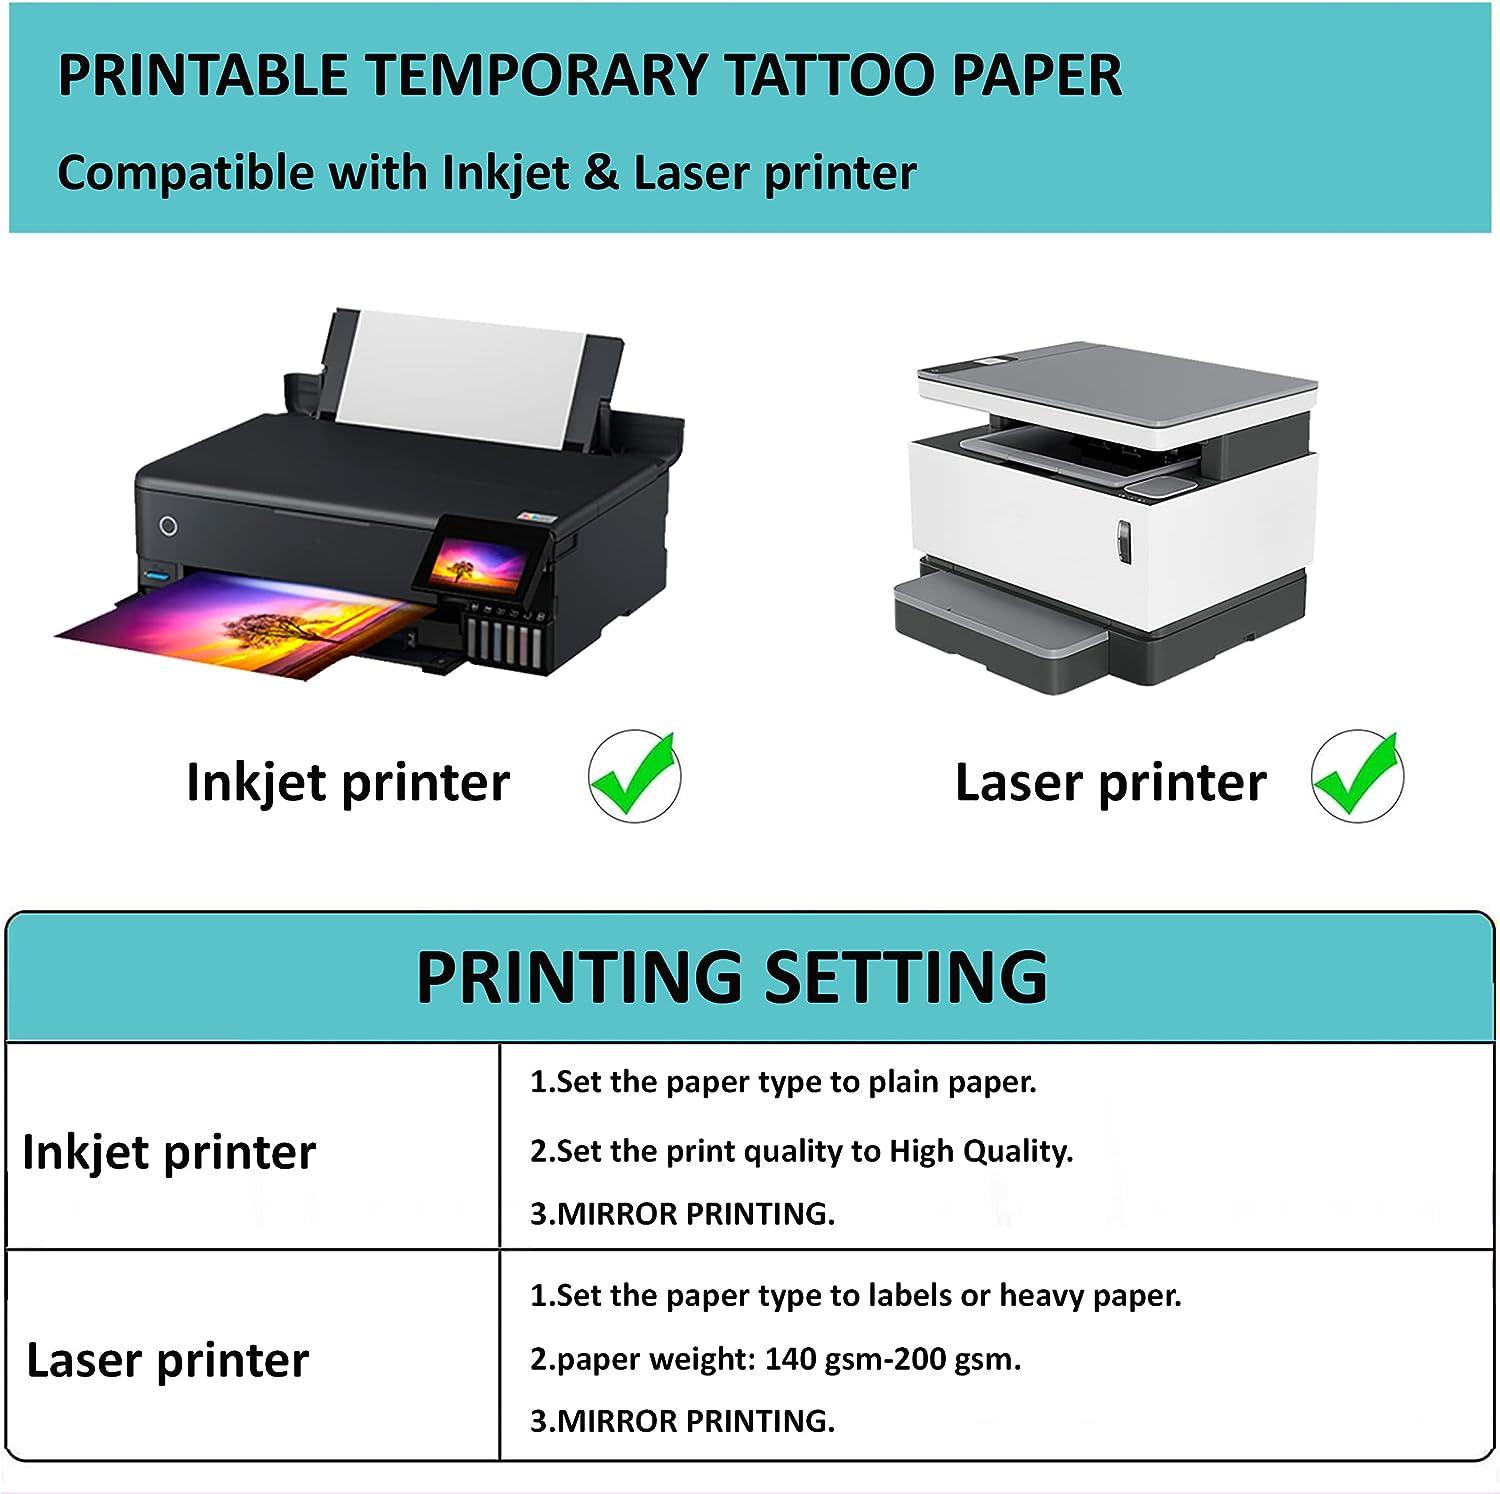 Printable Temporary Tattoo Paper 5 Sheets 8.5x11 inch Transfer Tattoo Decal  Paper for Inkjet & Laser Printer,DIY Your Image Transfer Sheet for Skin